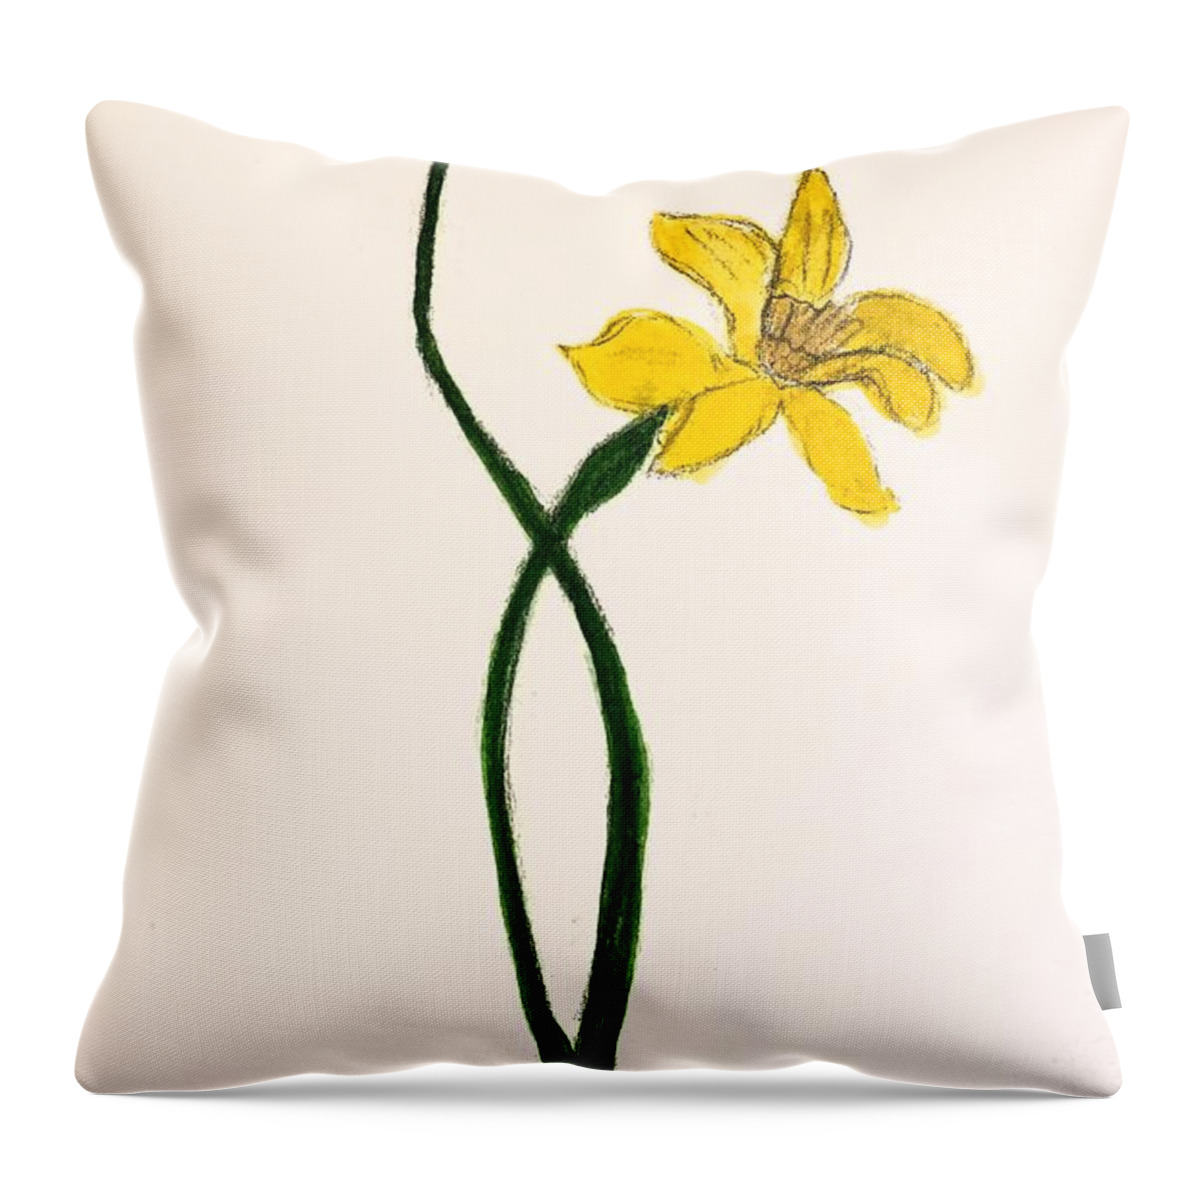 Yellow Flower Throw Pillow featuring the painting Daffodil by Margaret Welsh Willowsilk